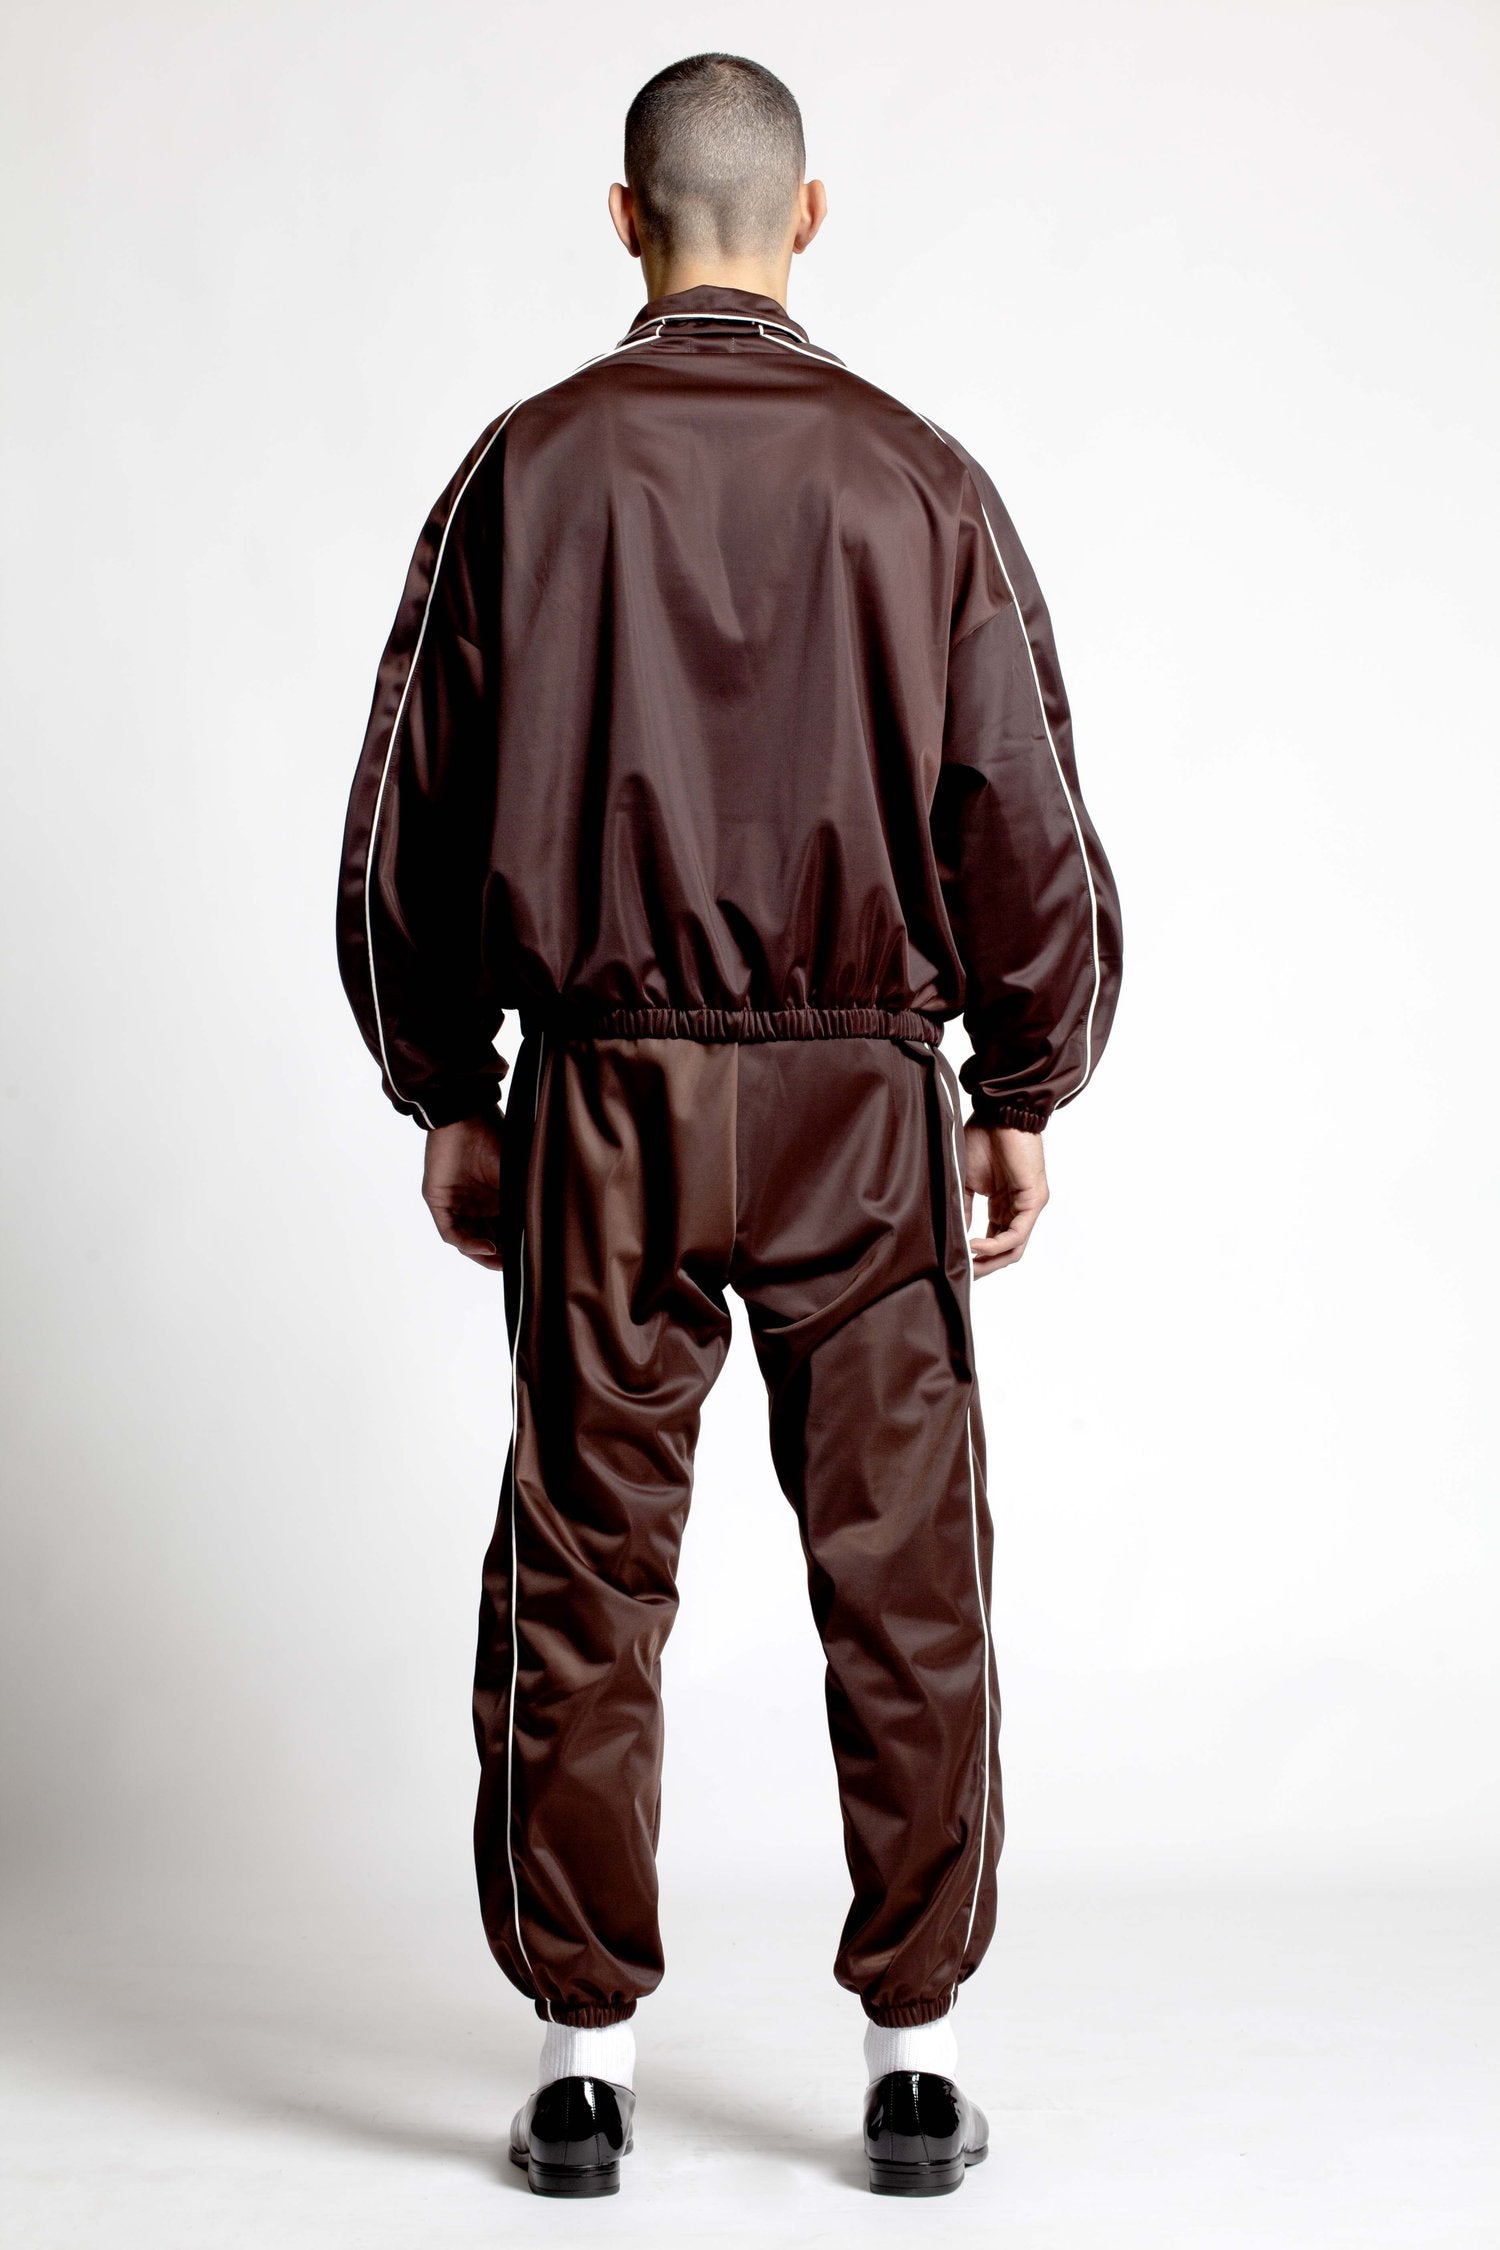 WILLY CHAVARRIA / BUFFALO TRACK PANT BROWN